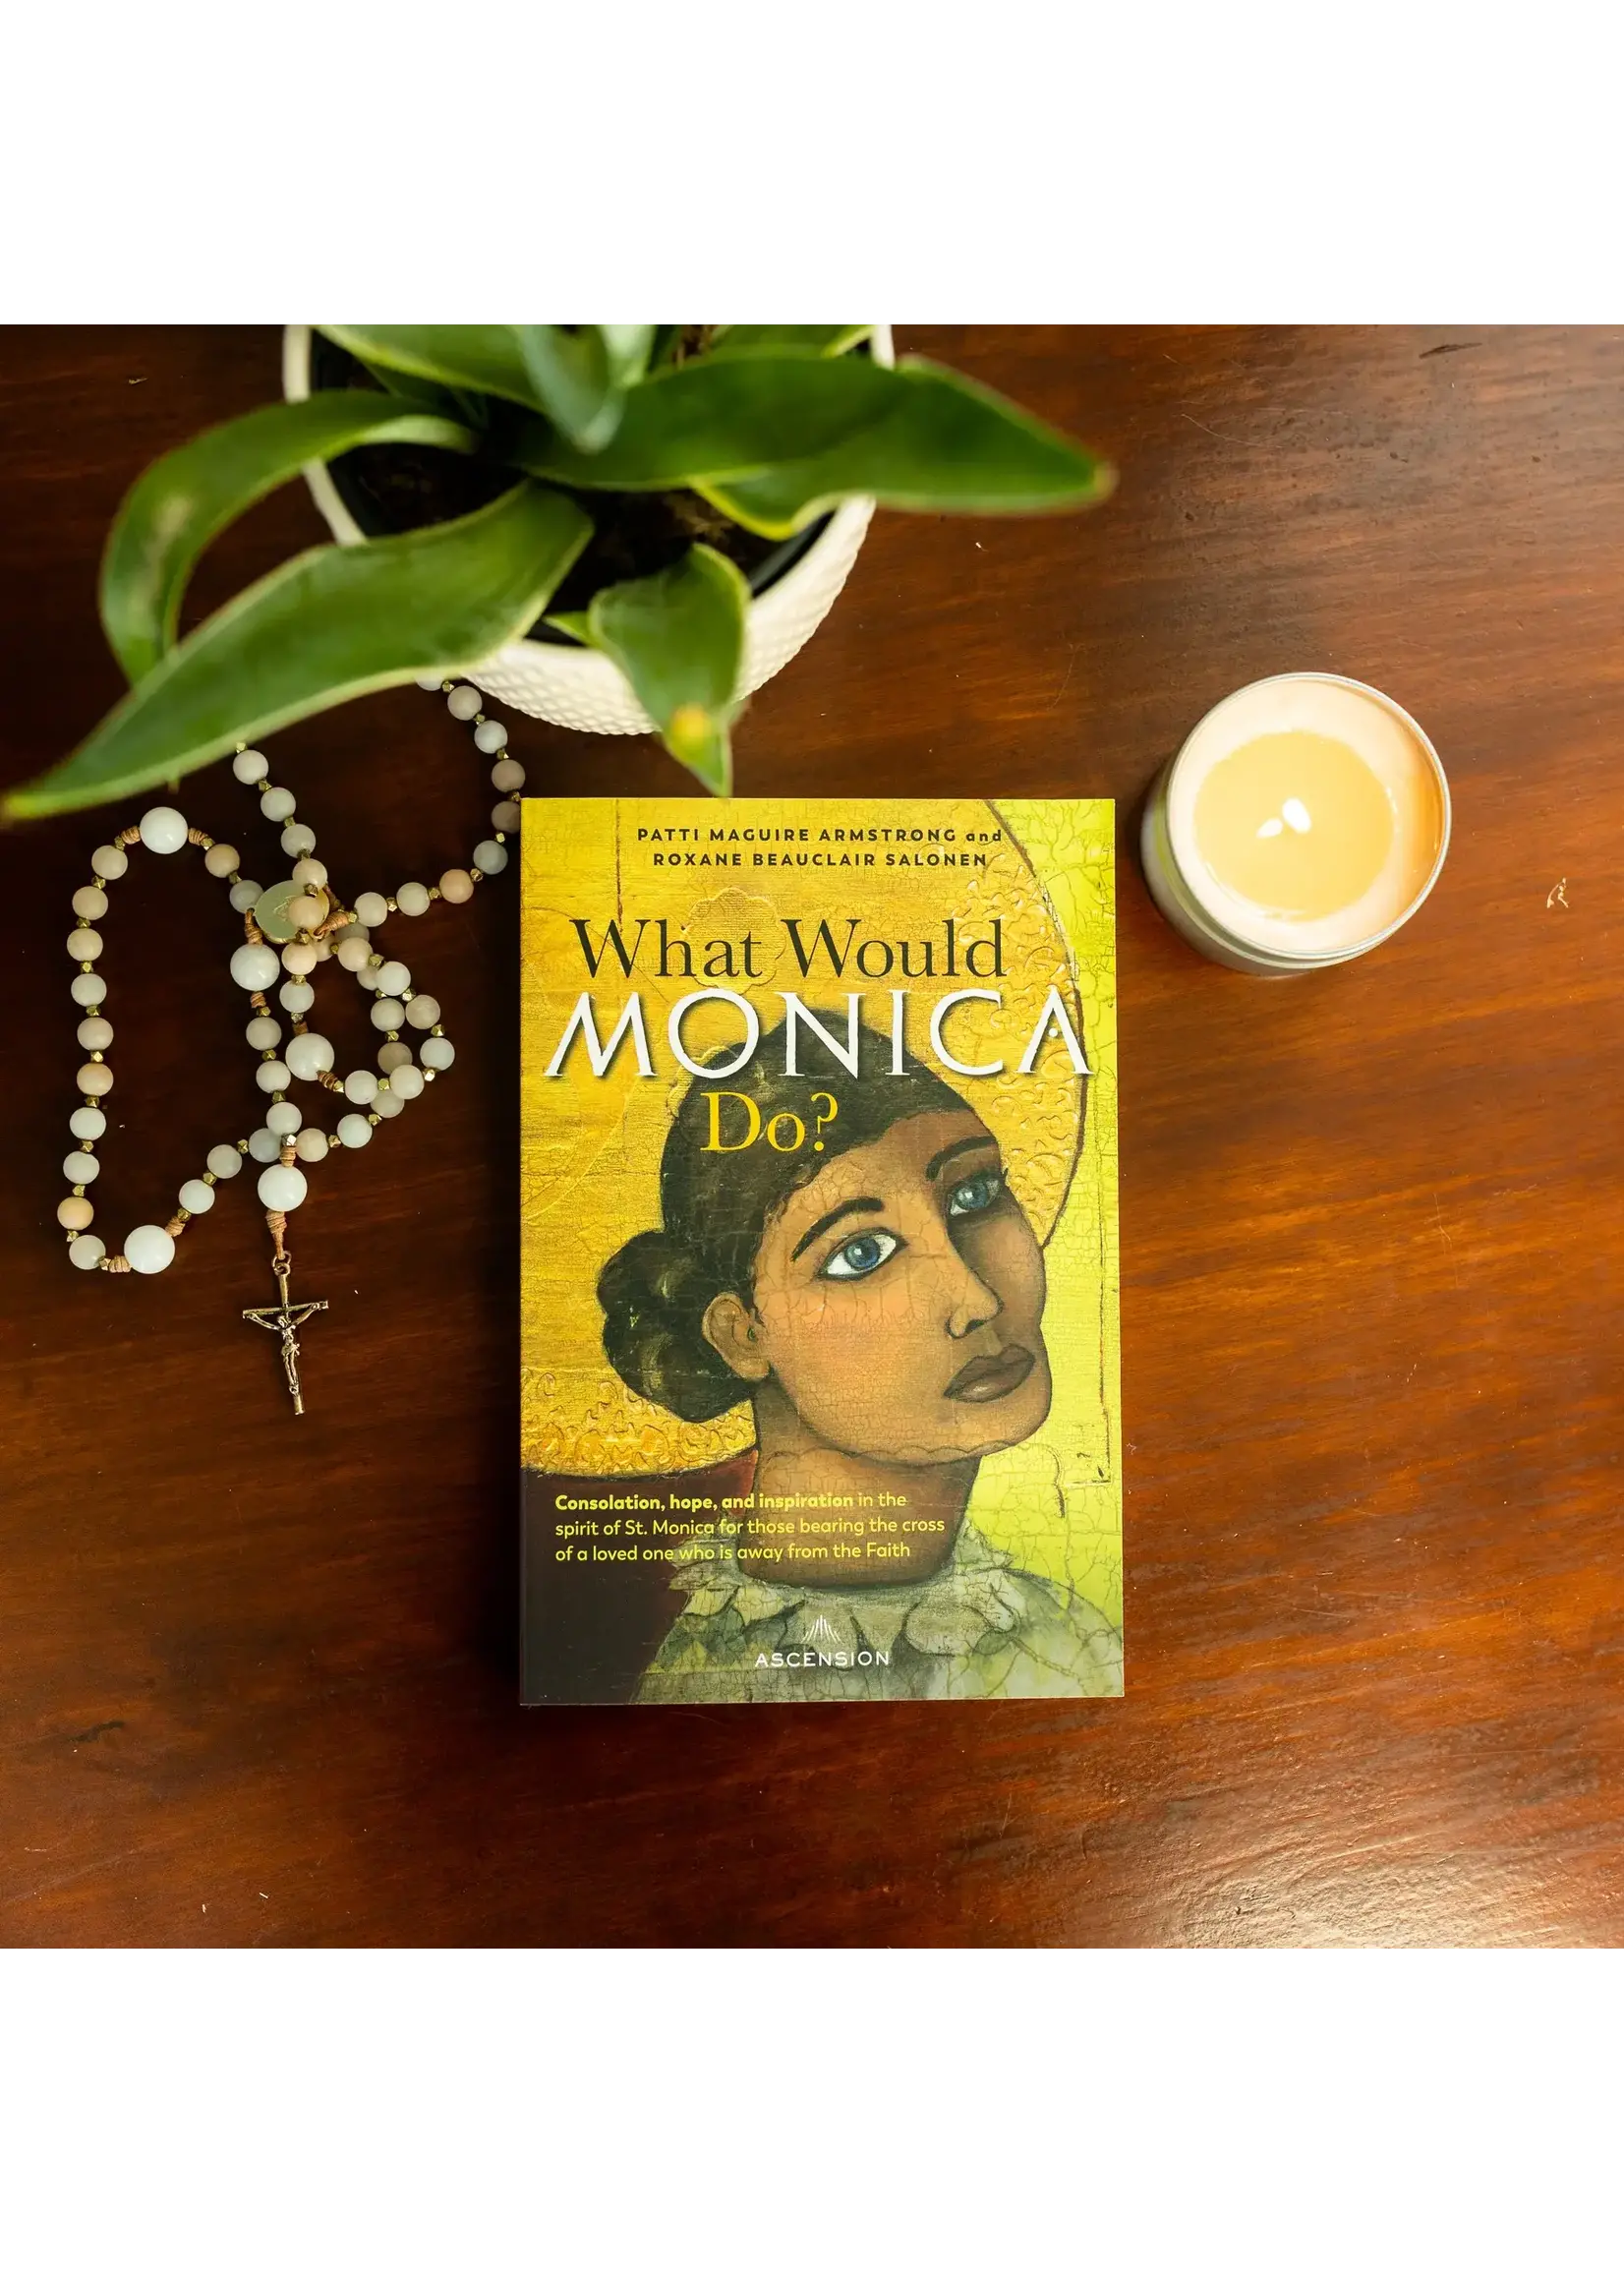 Ascension Press What Would Monica Do?